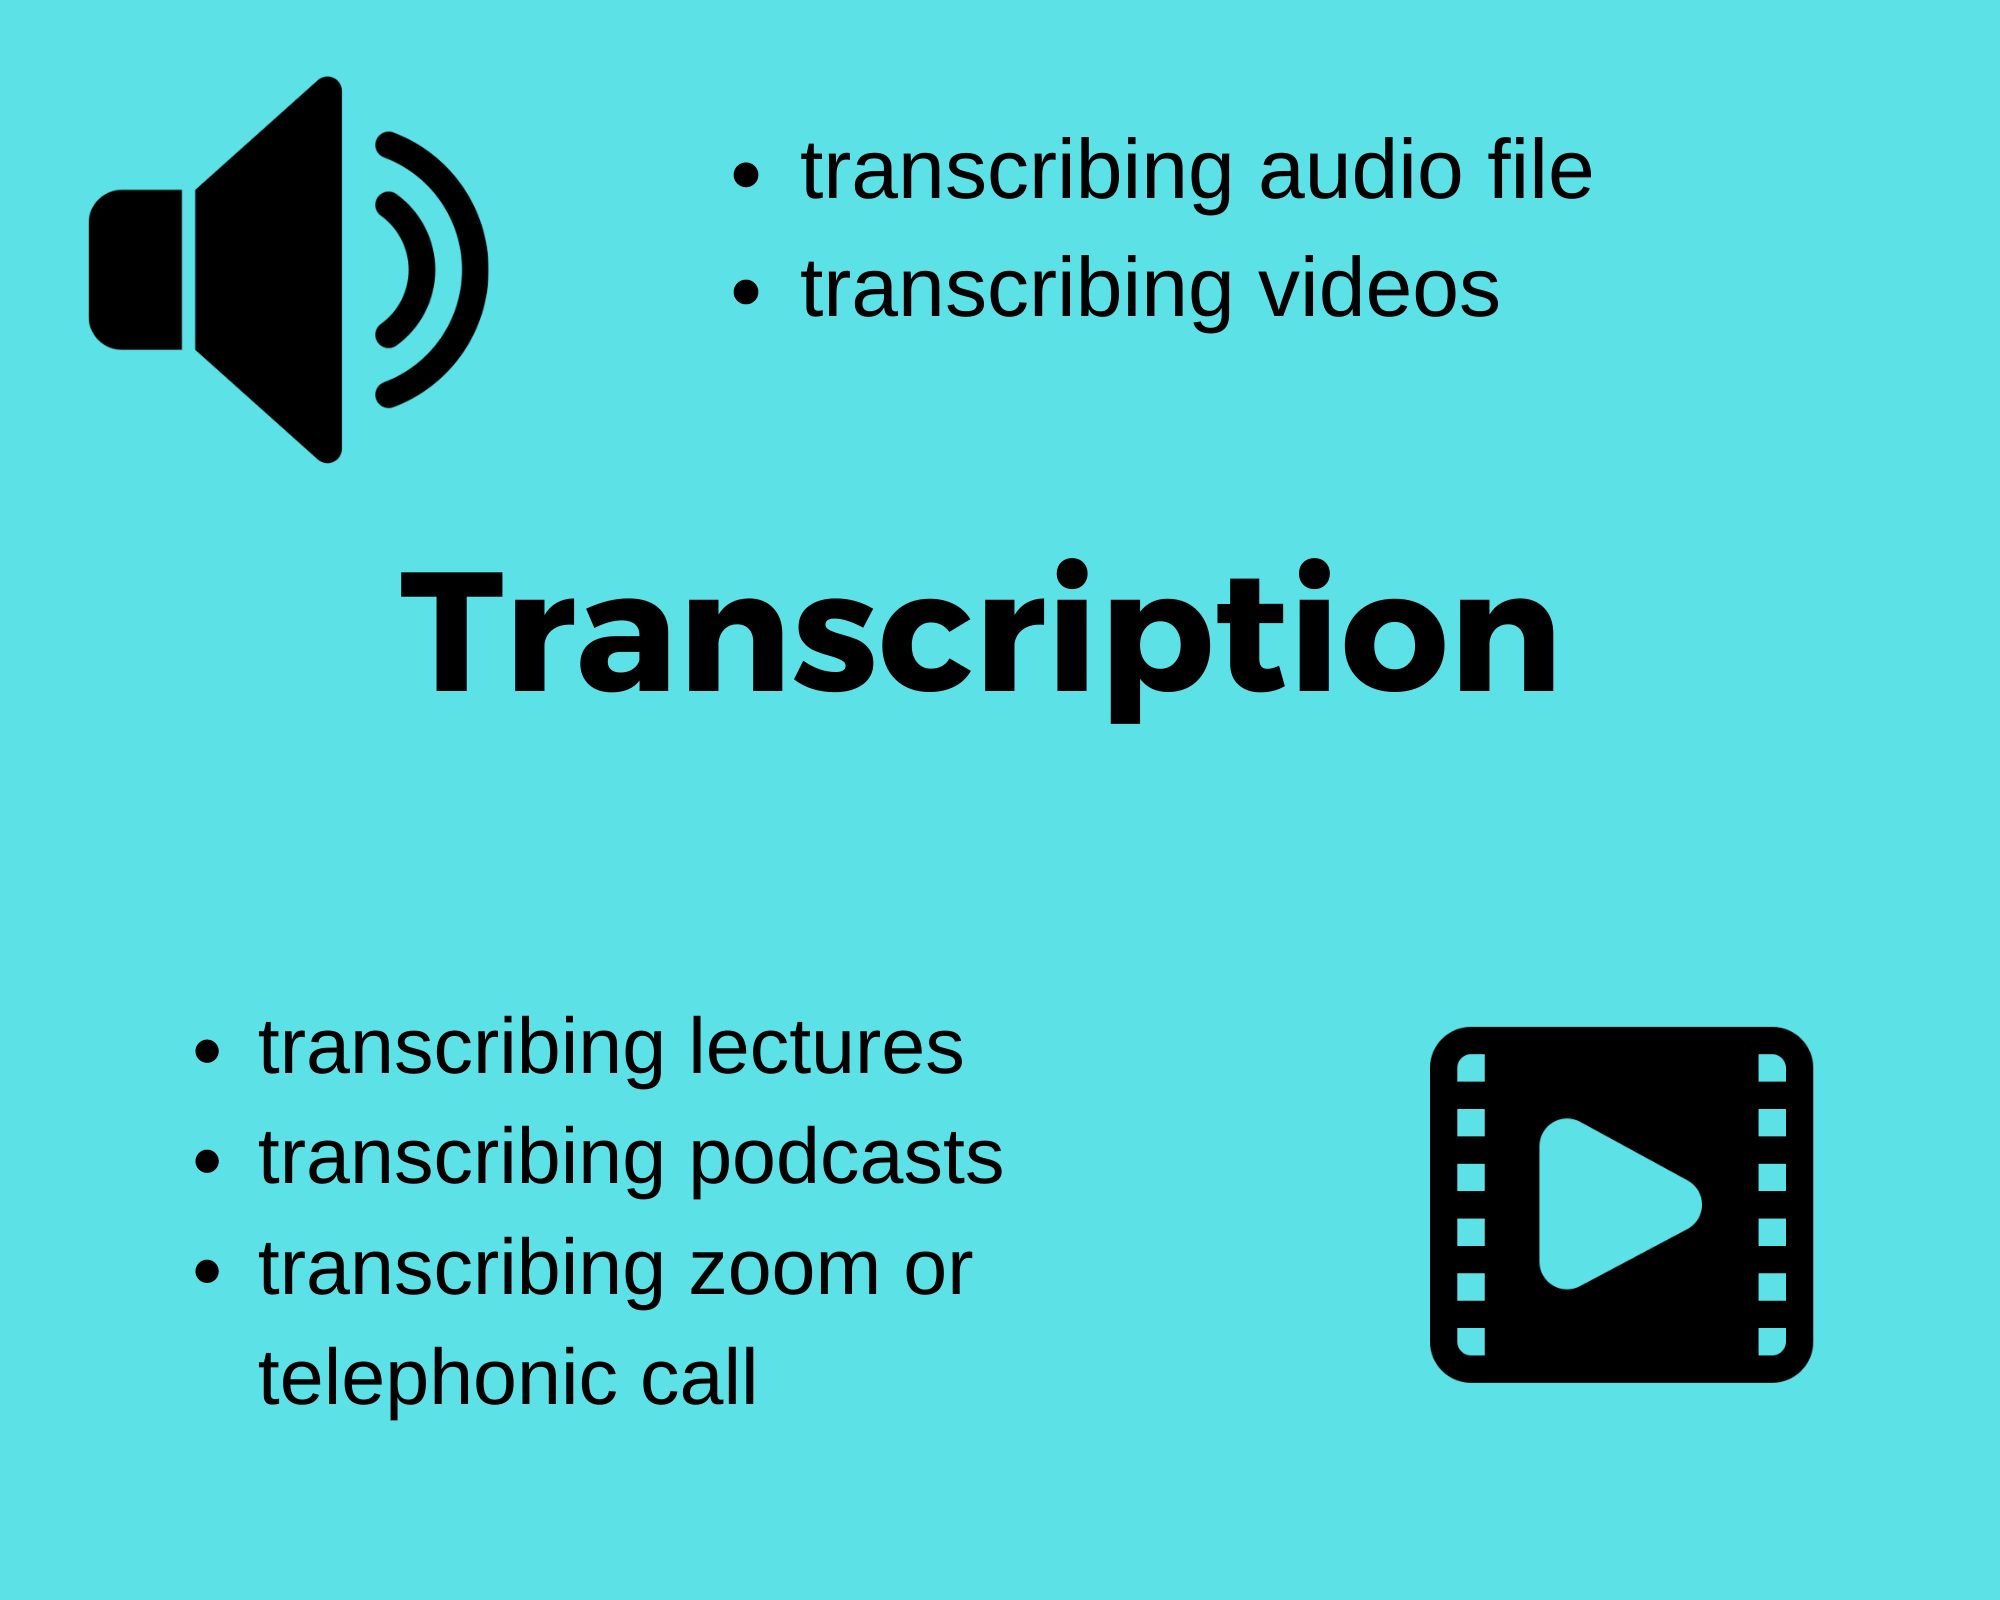 I will transcribe audio and video files